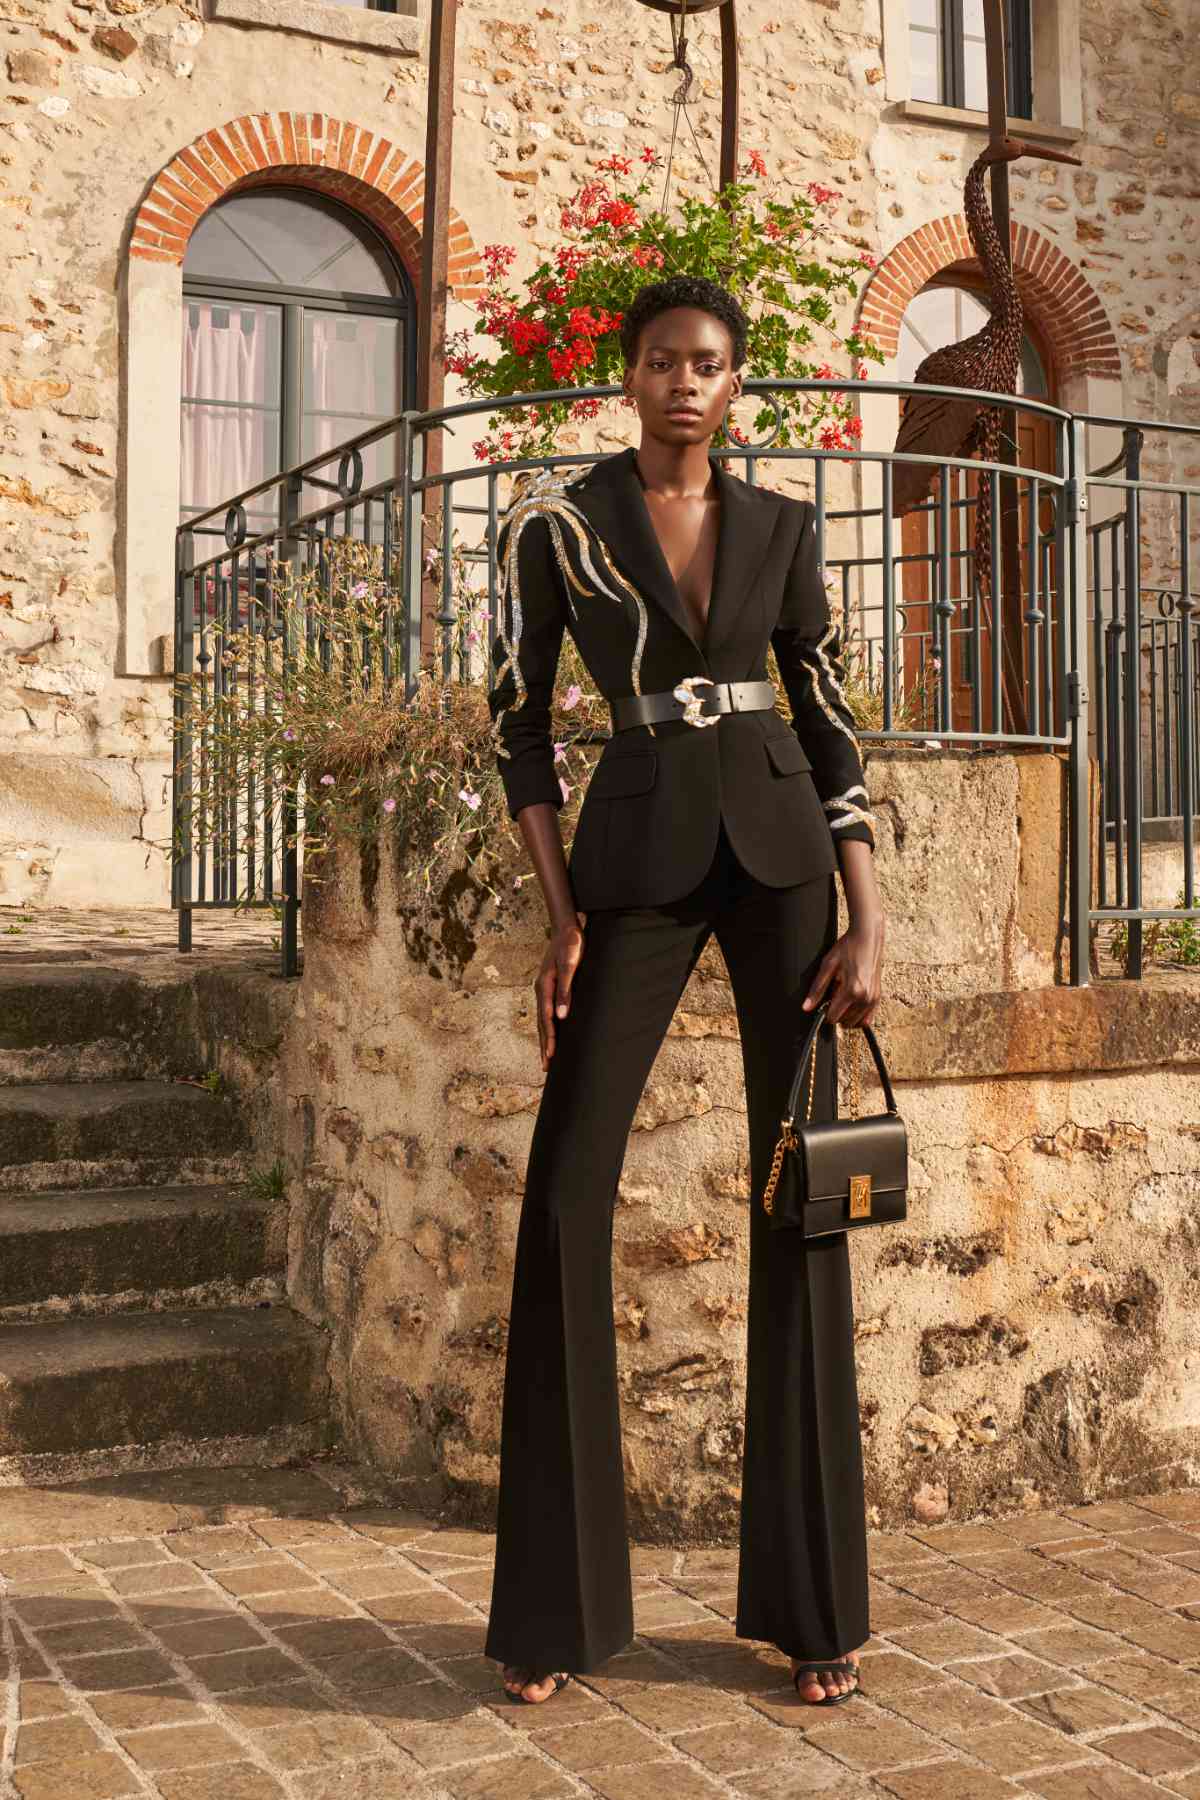 Zuhair Murad Presents Its New Ready-To-Wear Resort 2023: Imprint Of Nature